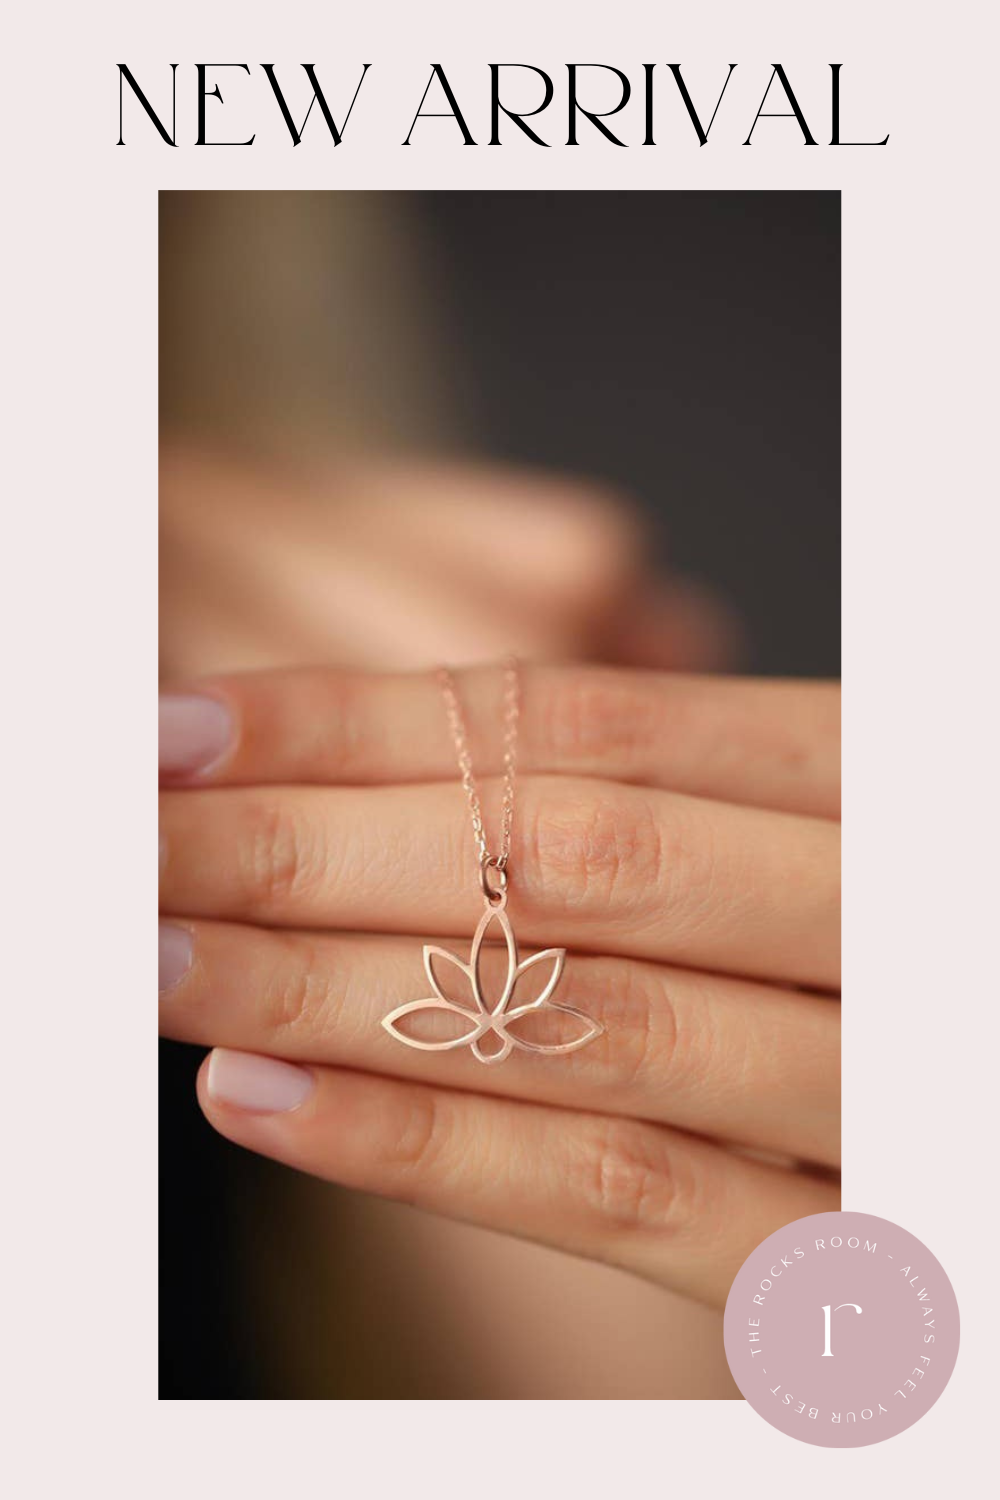 Lotus Necklace. 18k Rose Gold Plated 925 Silver